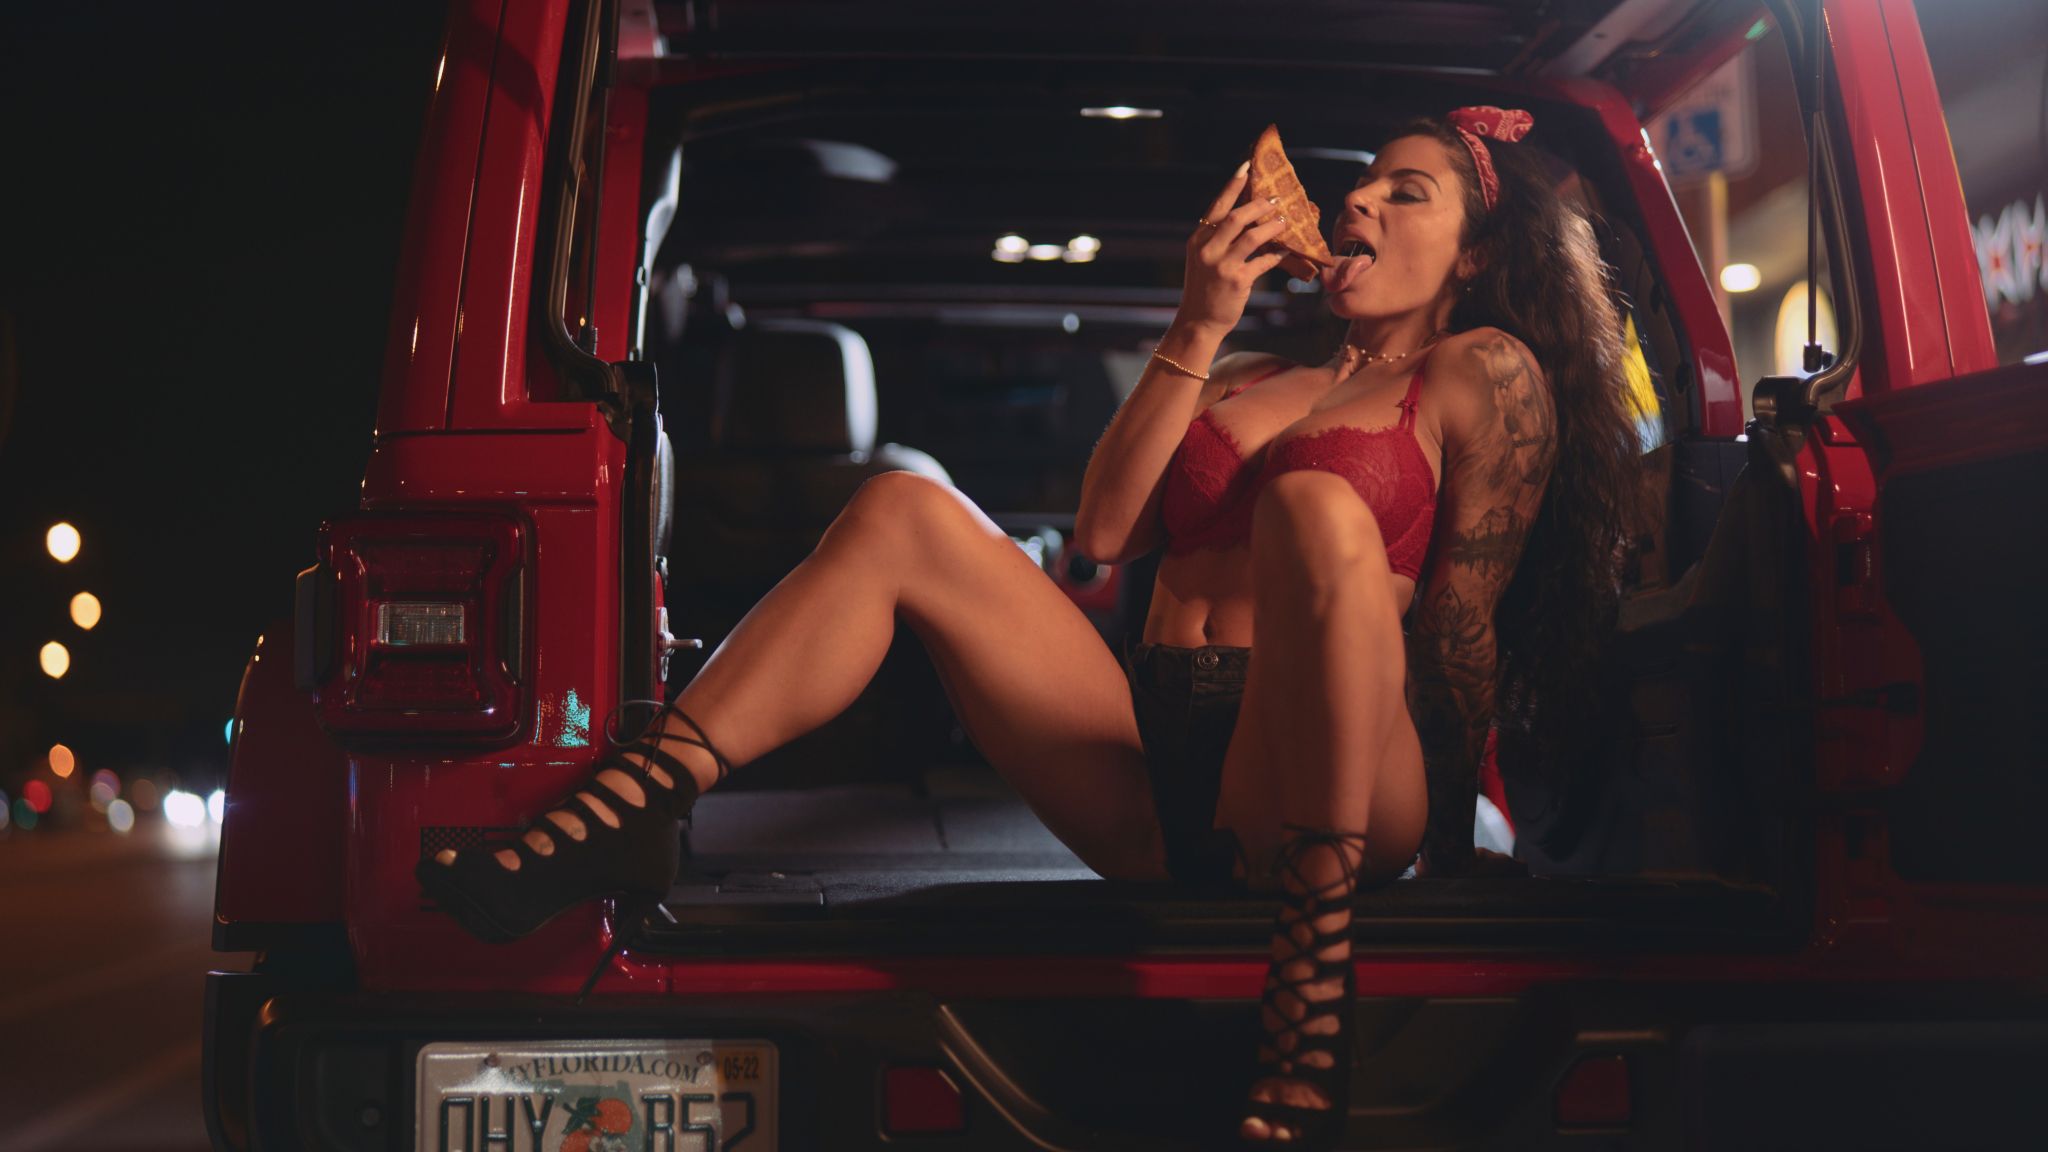 Woman with long brown hair wearing a red lacy bra with black shorts sitting in the back of a red jeep eating a grilled cheese sandwich